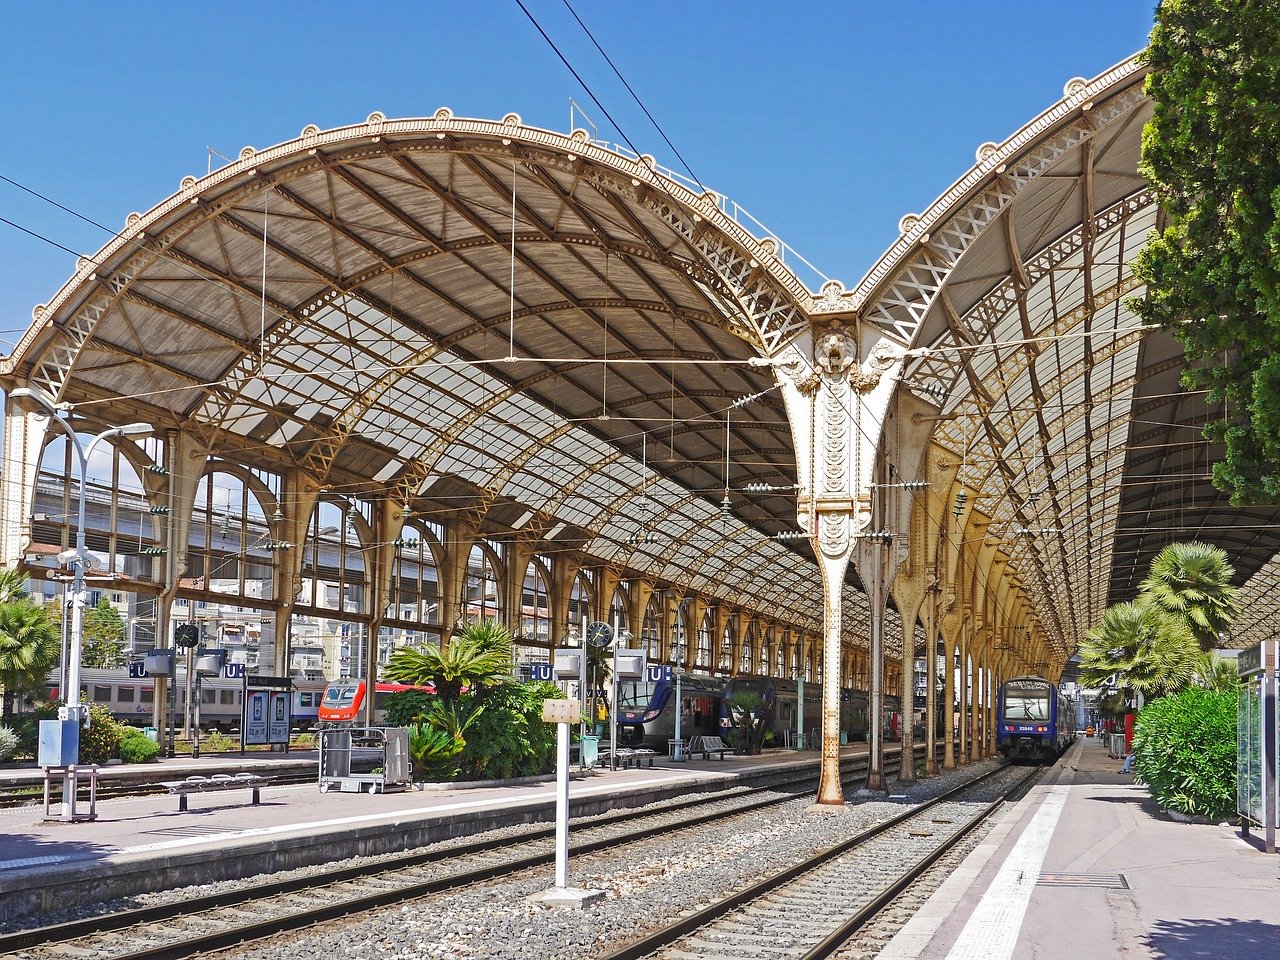 How To Get from Orly Airport to Gare de l’Est